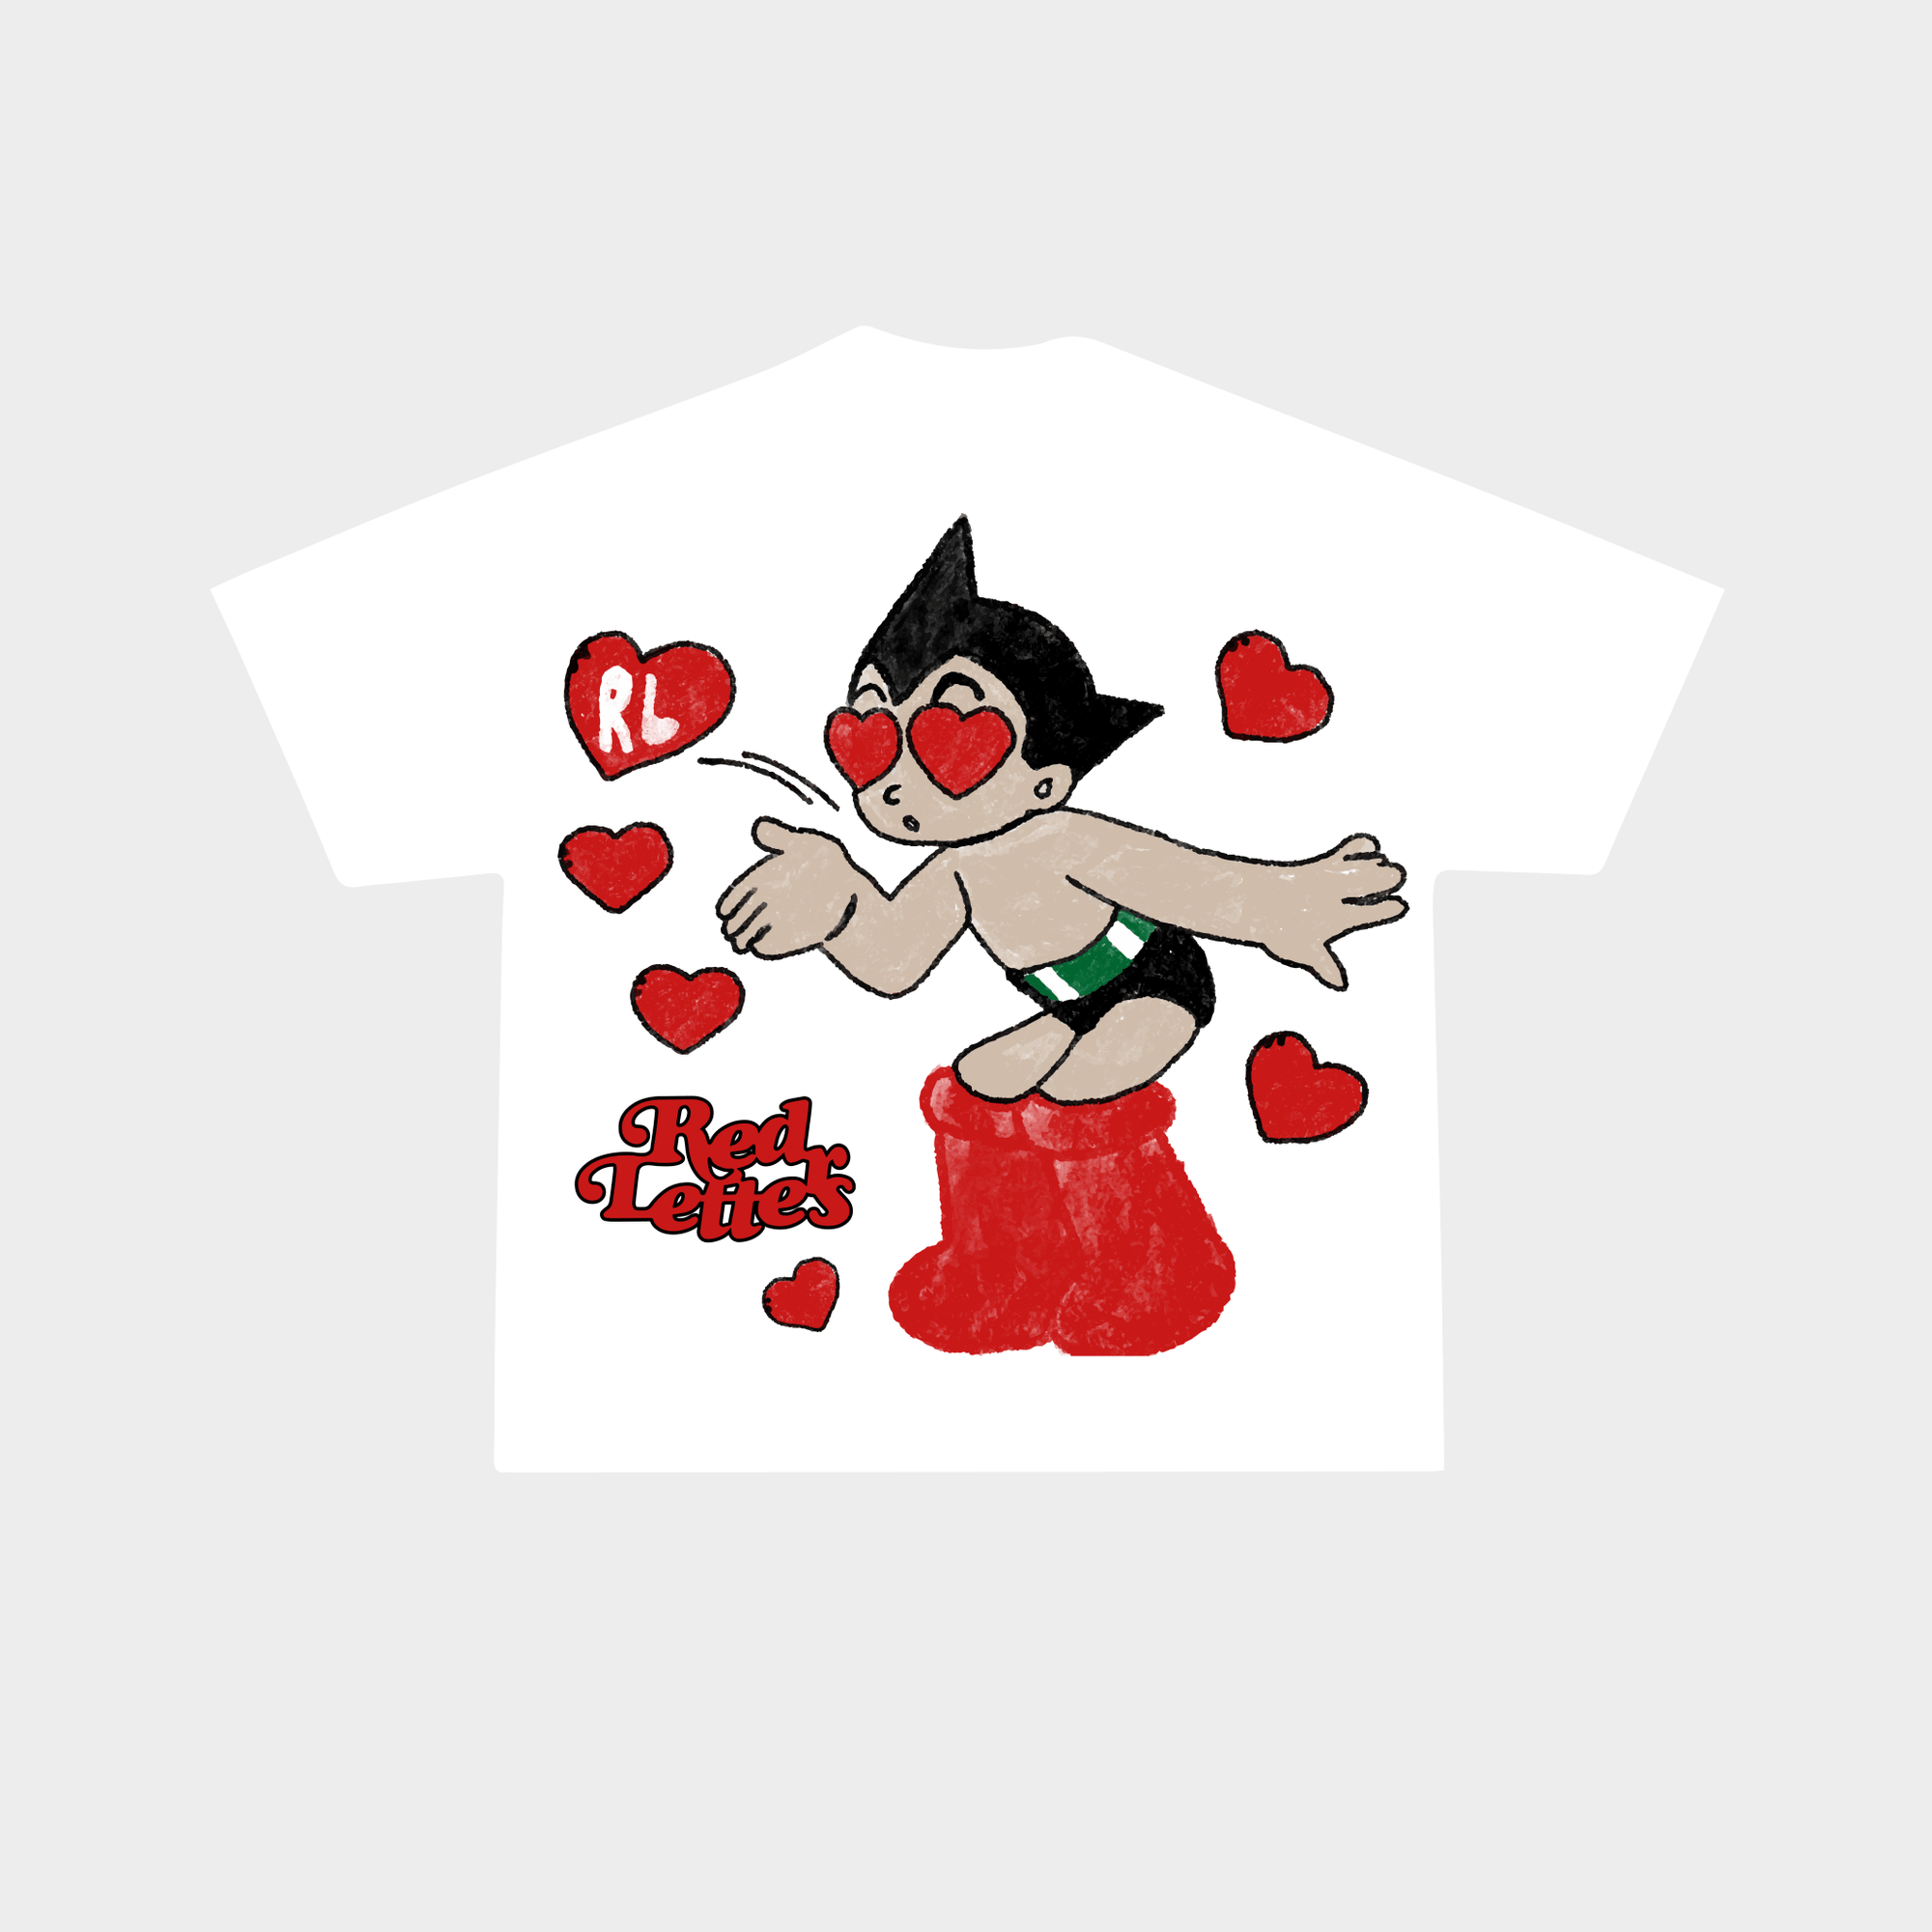 "Astro Kiss" Tee - RED LETTERS